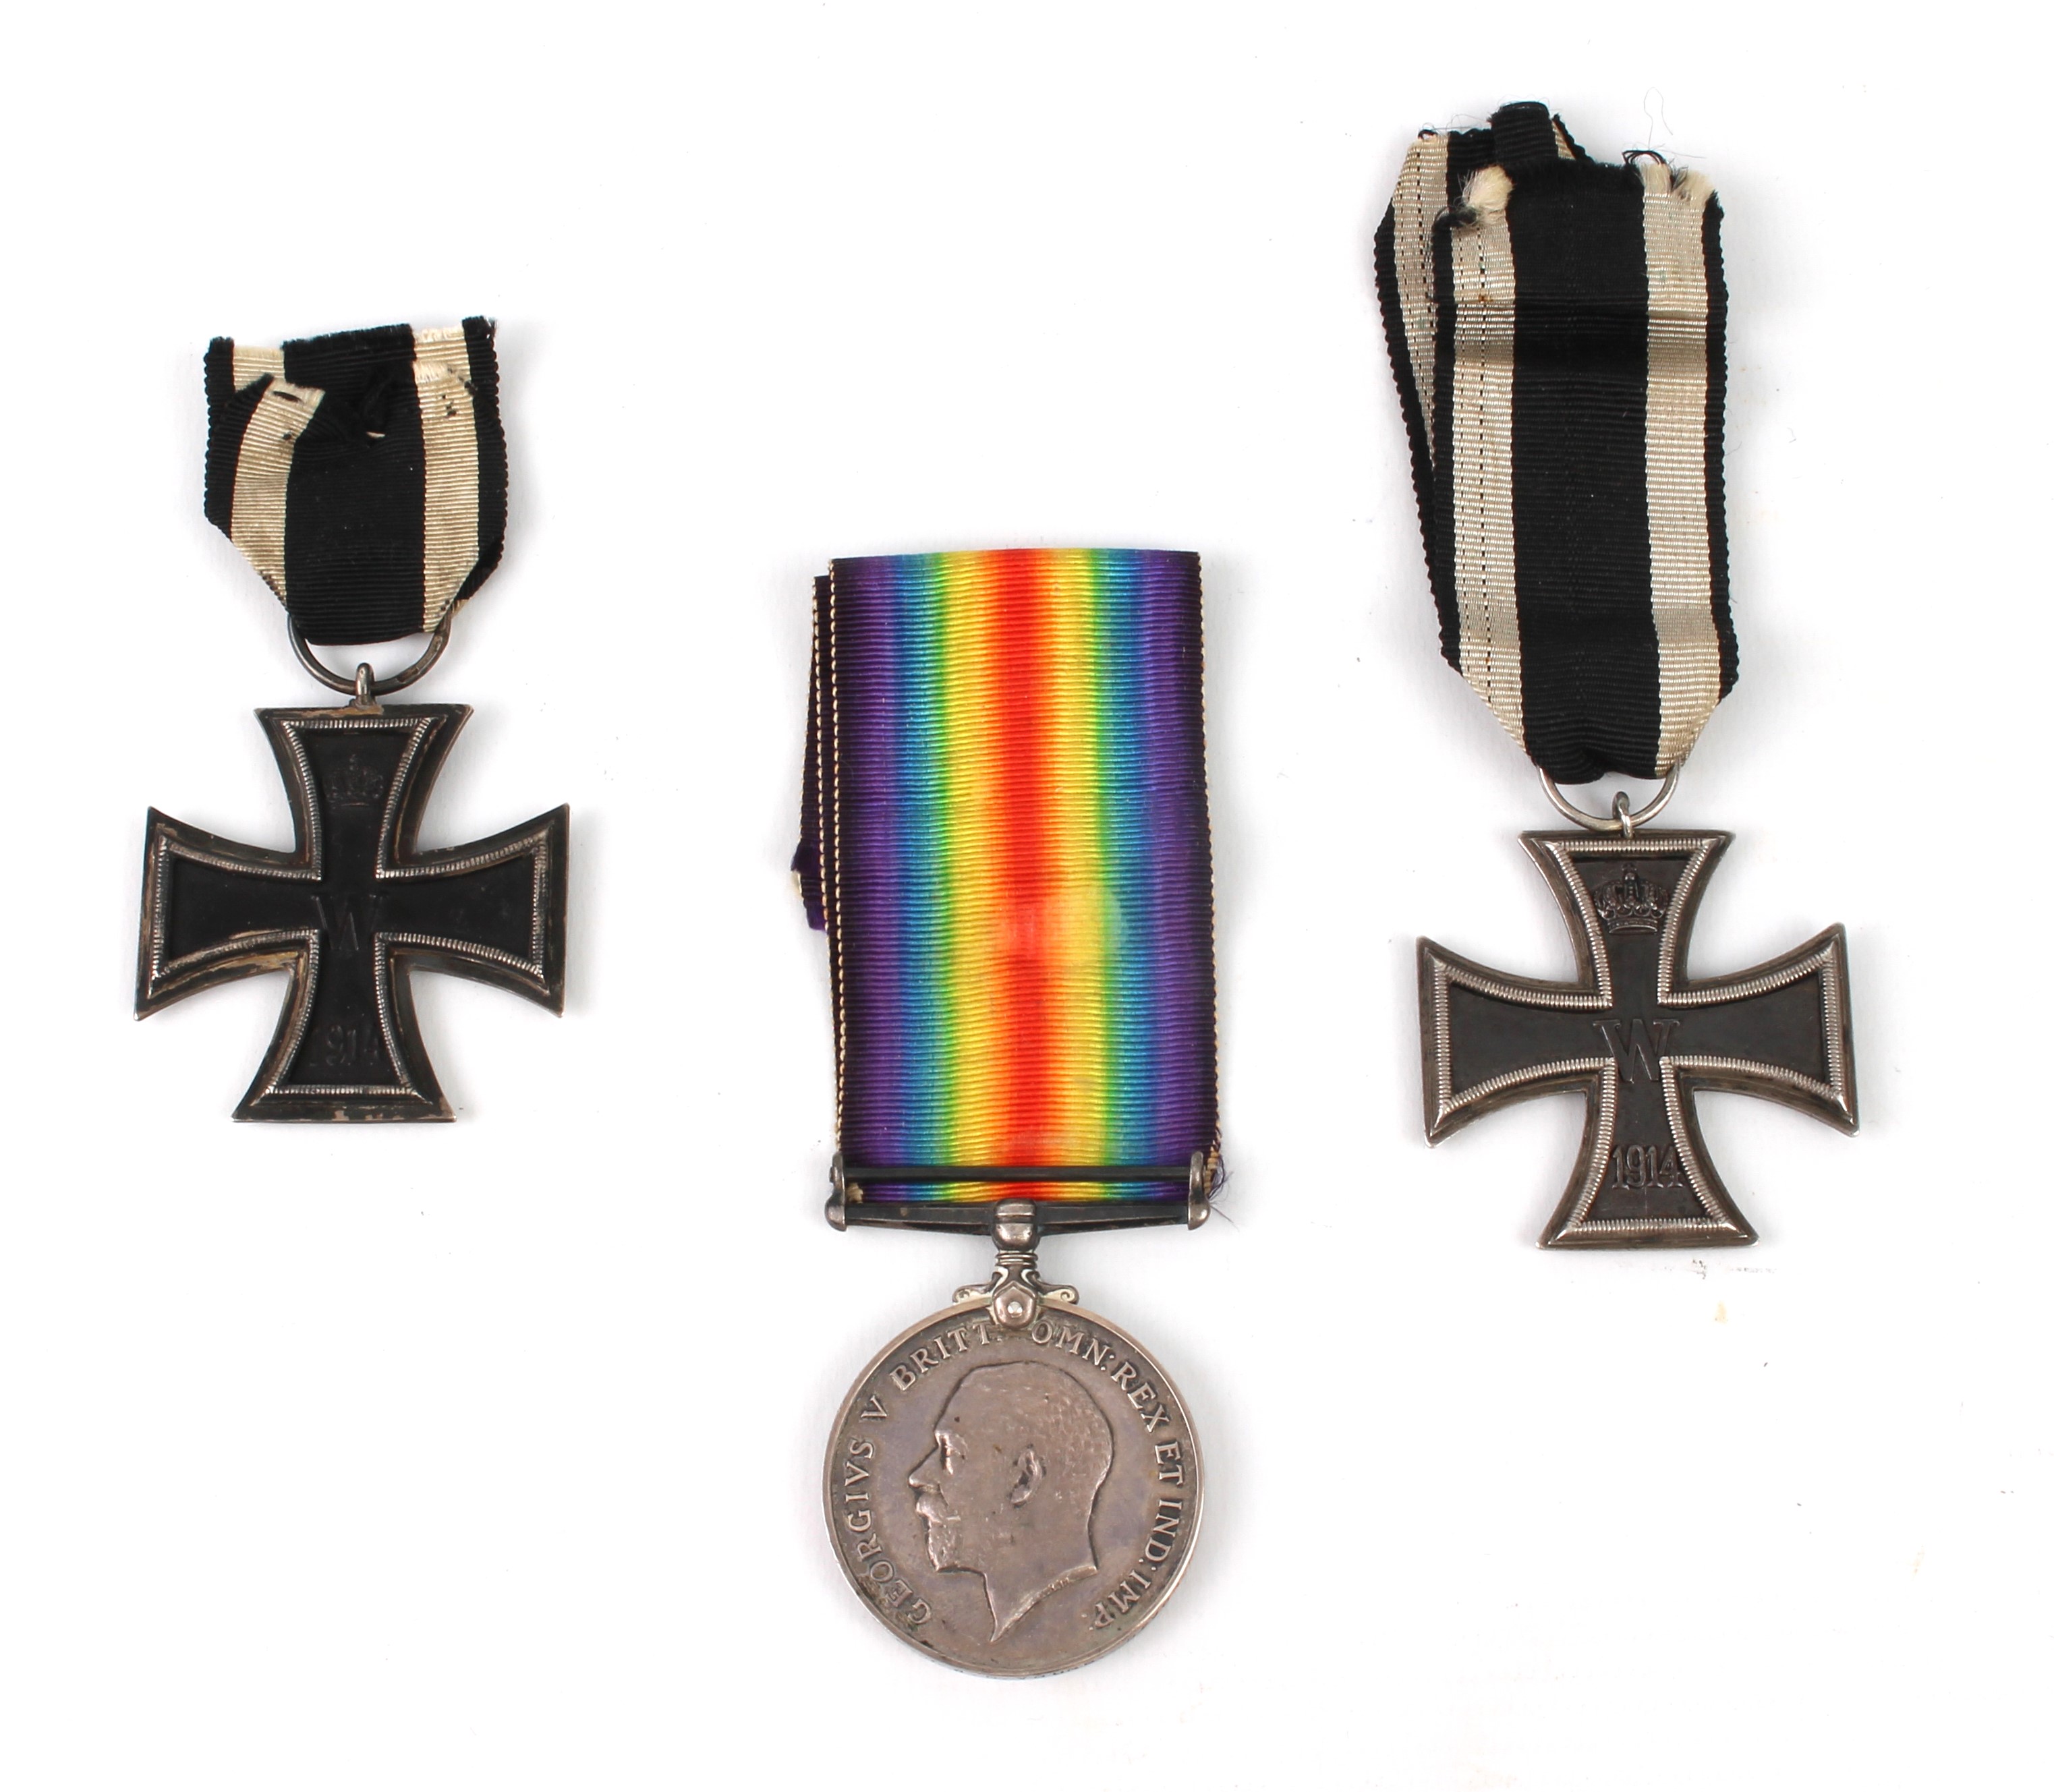 The British War Medal to 70886 PTE. J.W.D. YOUNG, DEVON. R. and two Iron Crosses - Image 2 of 2